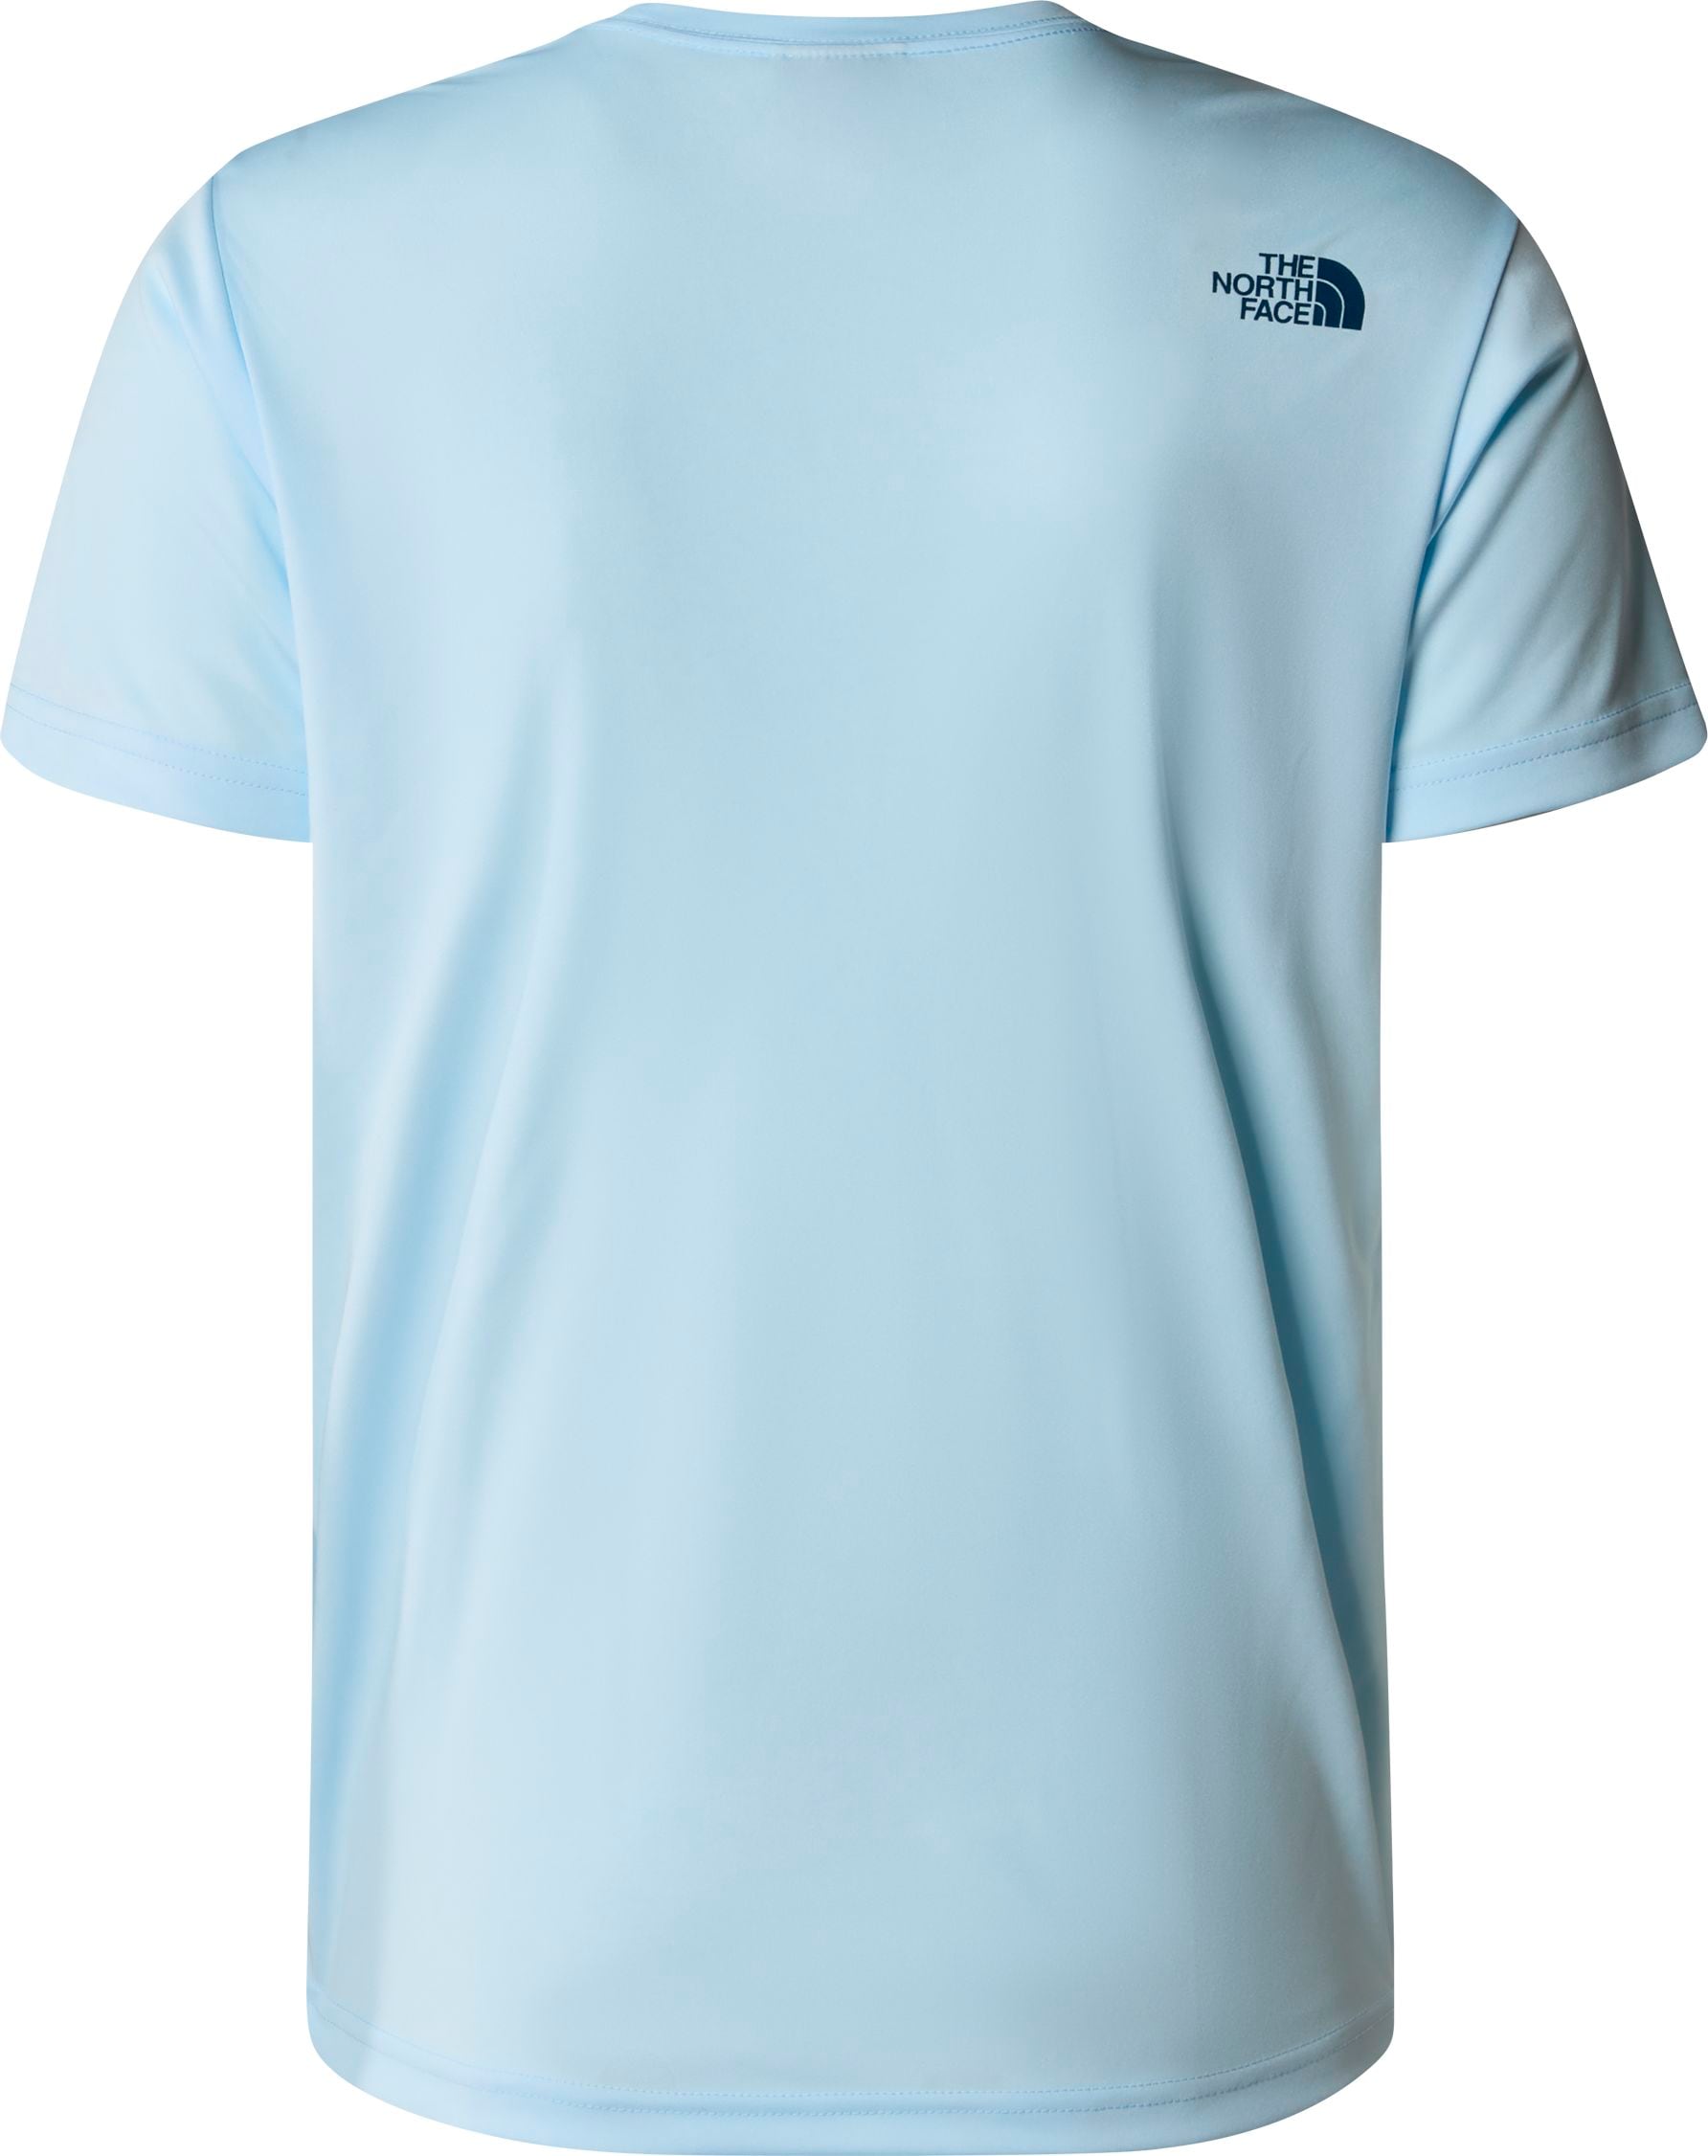 THE NORTH FACE, M REAXION EASY TEE